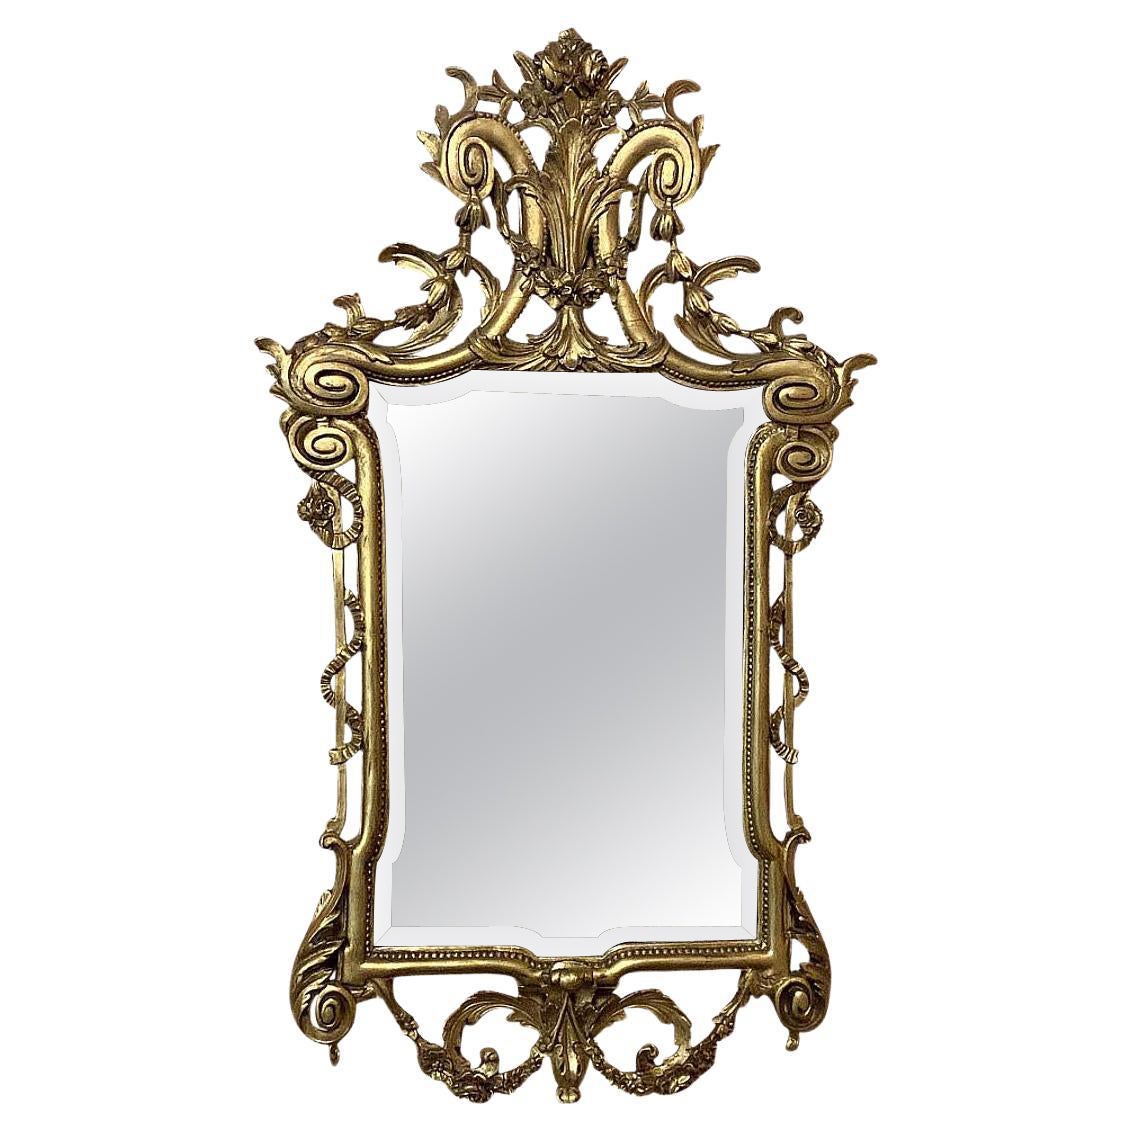 19th Century Italian Neoclassical Carved Giltwood Mirror For Sale